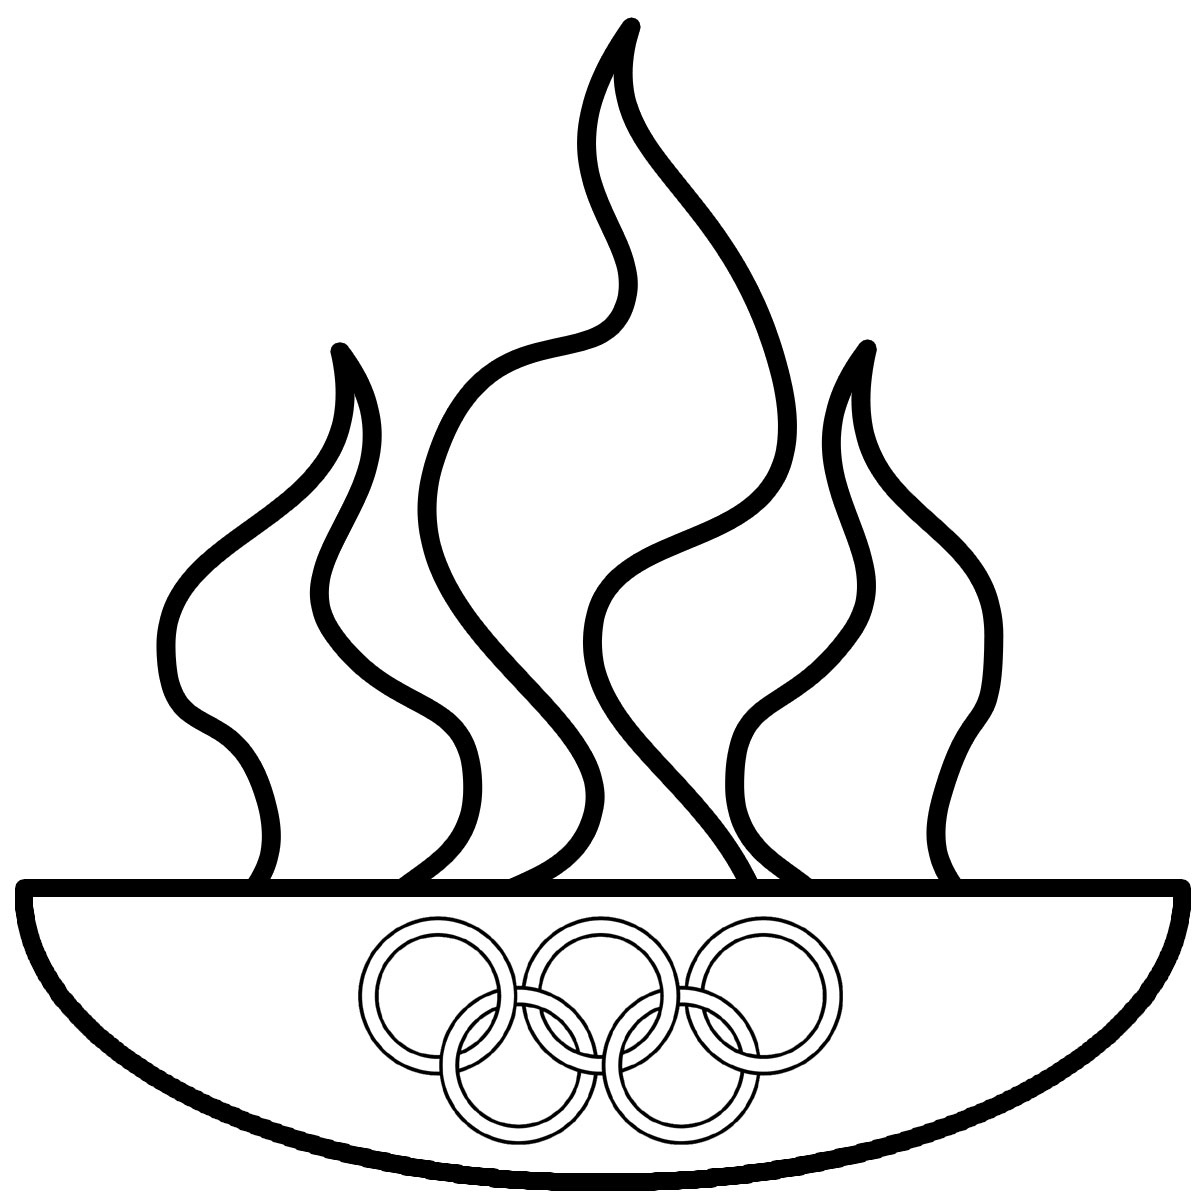 Black And White Olympic Medal Clipart.